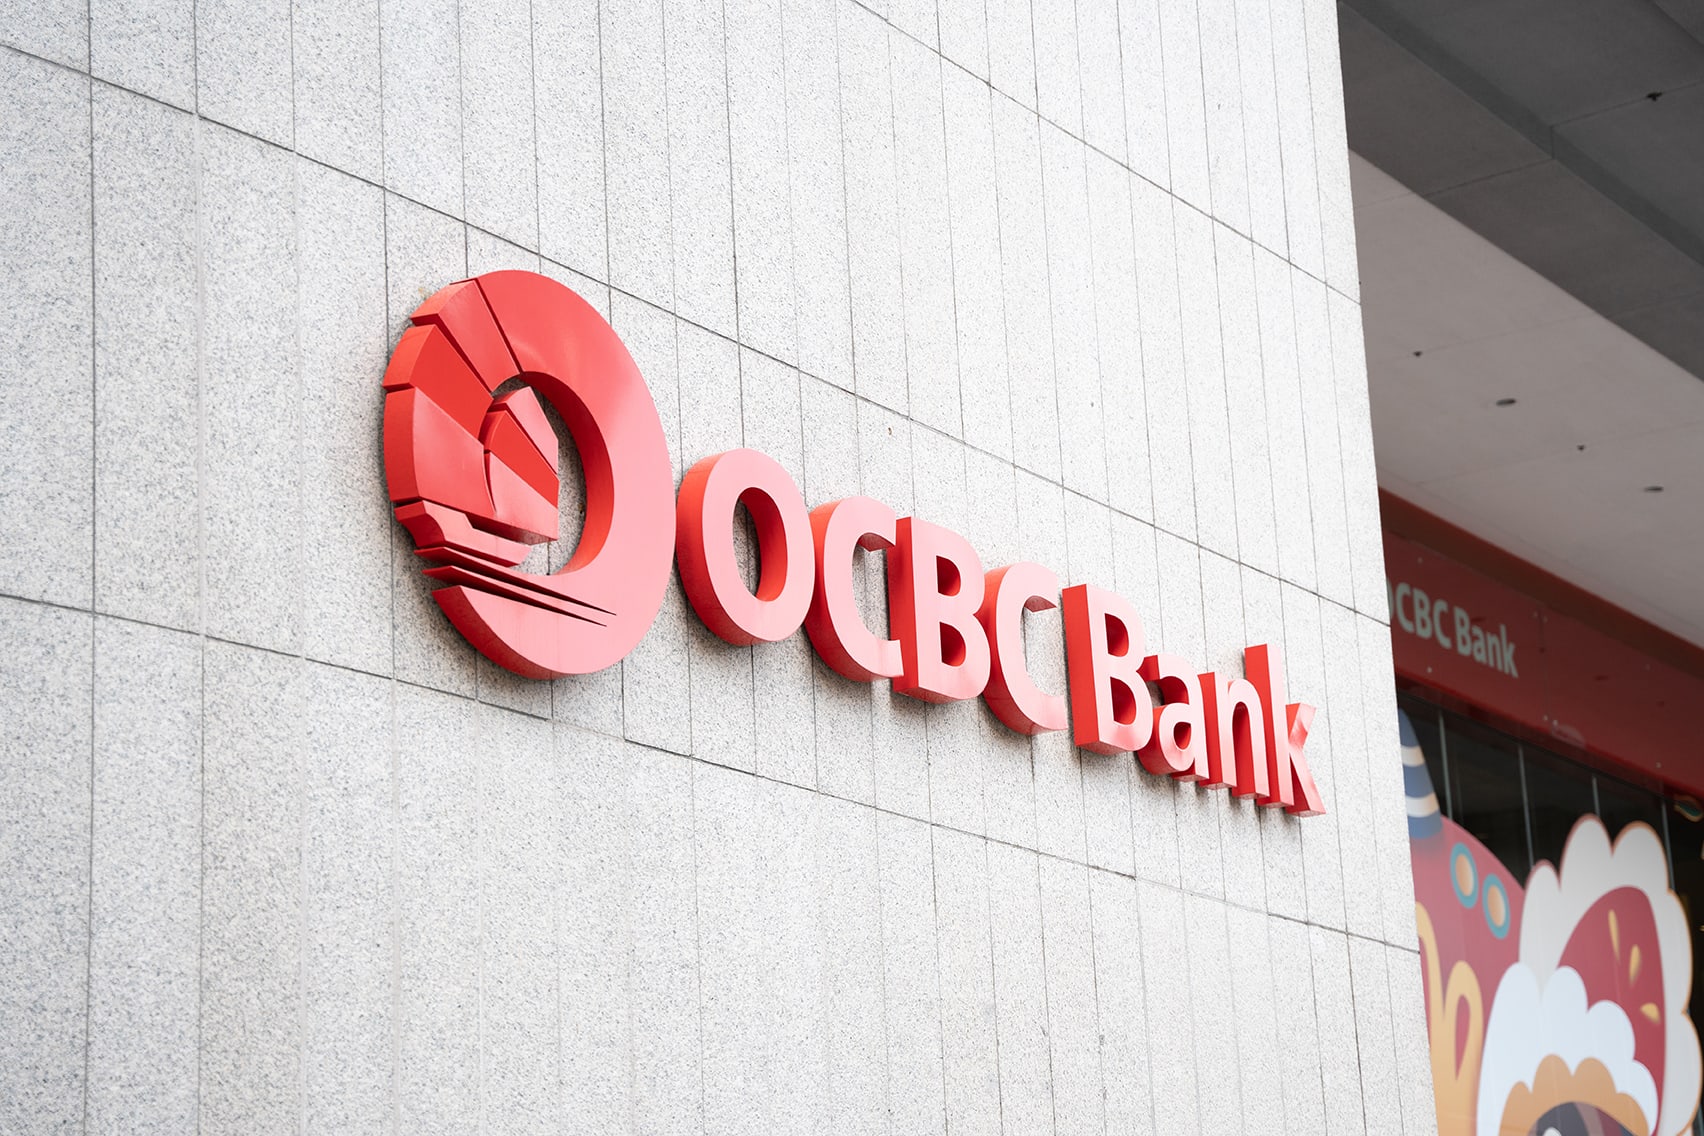 OCBC fully reimburses all phishing scam victims, who total 790 with combined losses of S$13.7m